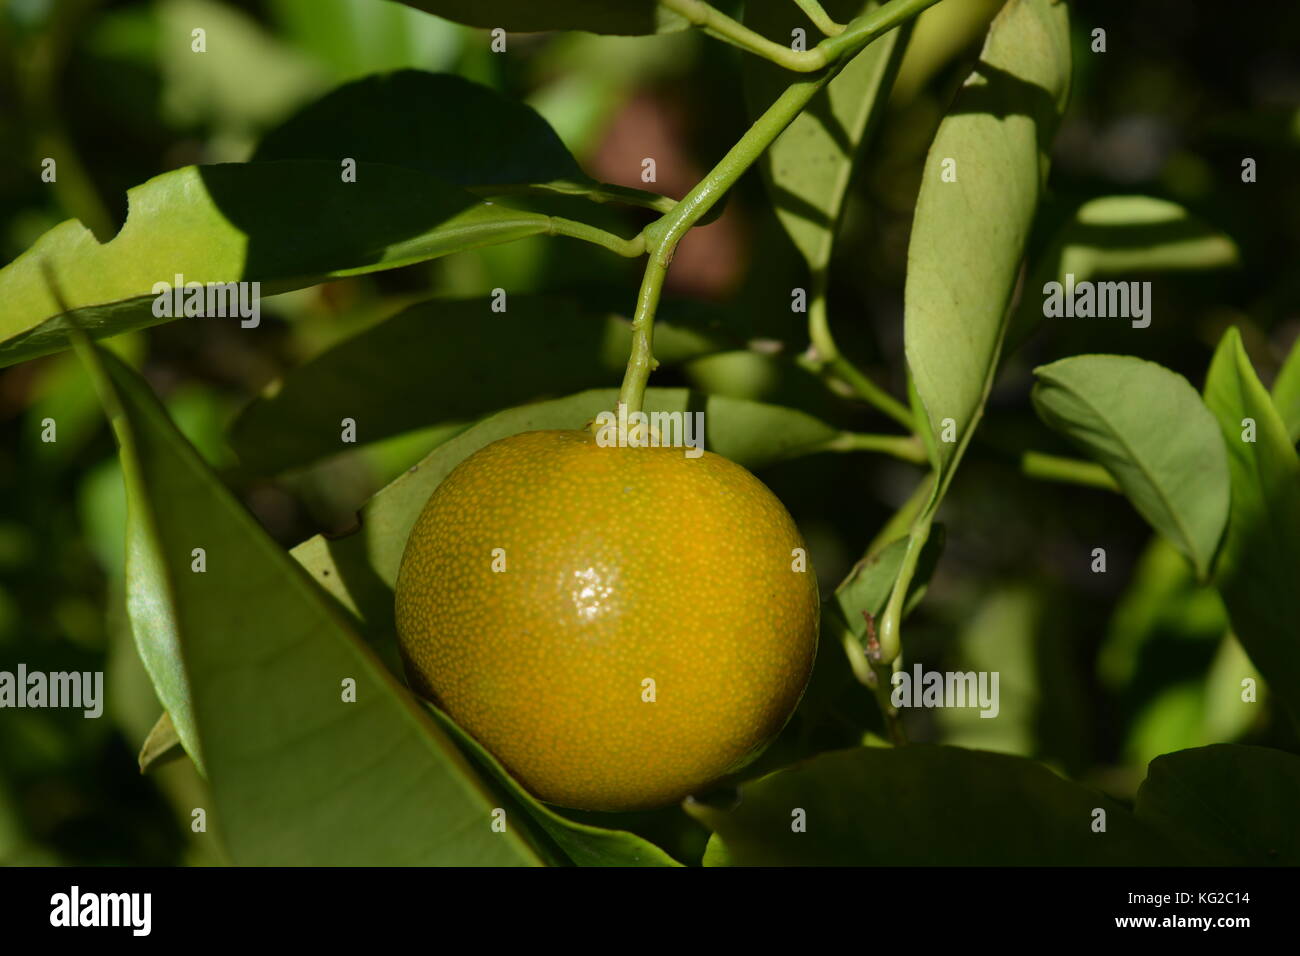 Limau kasturi, a small orange coloured lime commonly grown in Malaysia and sometimes known as Calamansi. Stock Photo